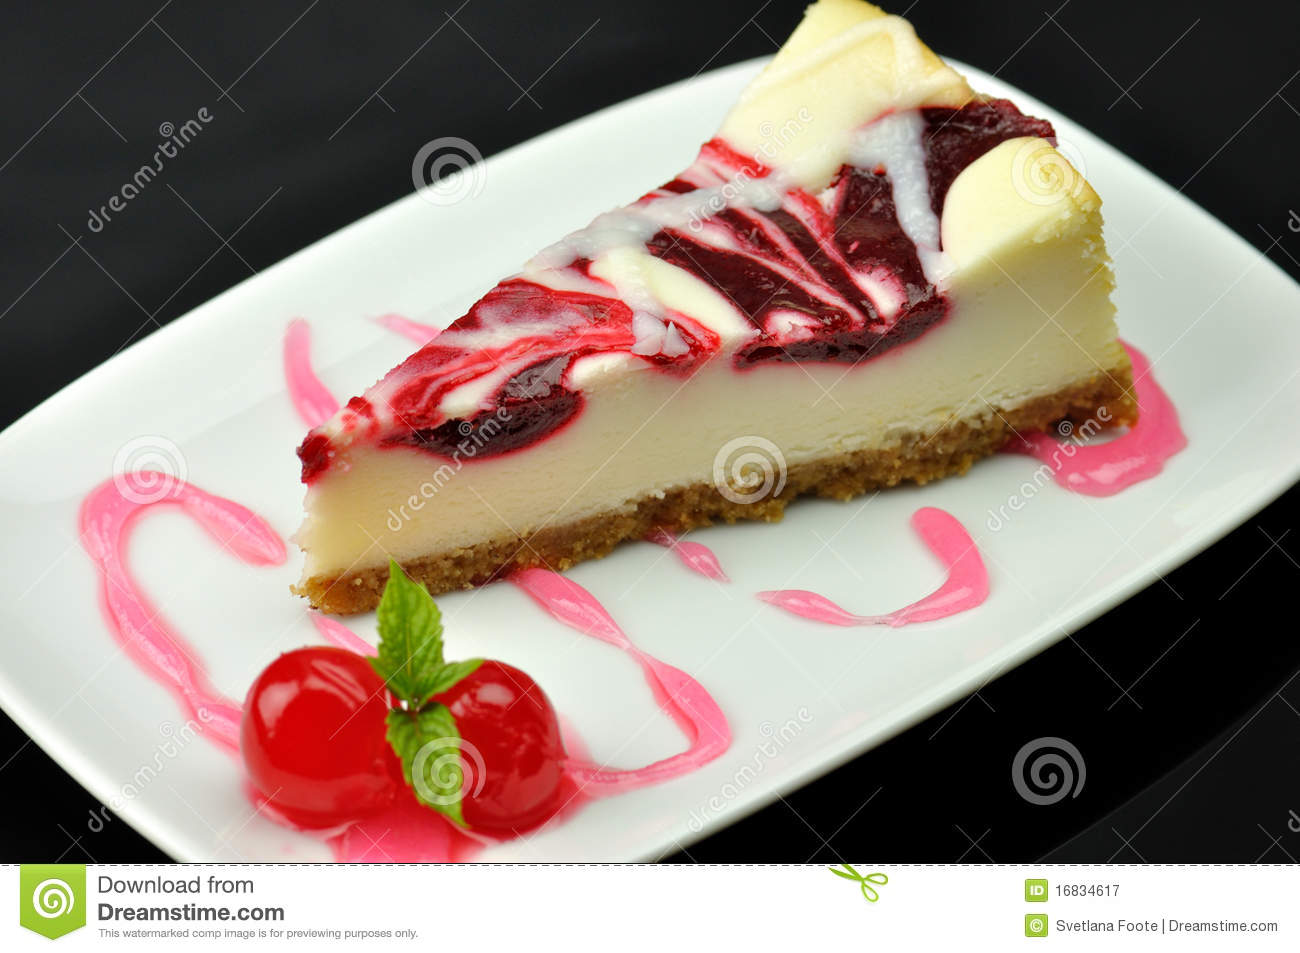 Cheesecake Royalty Free Stock Photography   Image  16834617